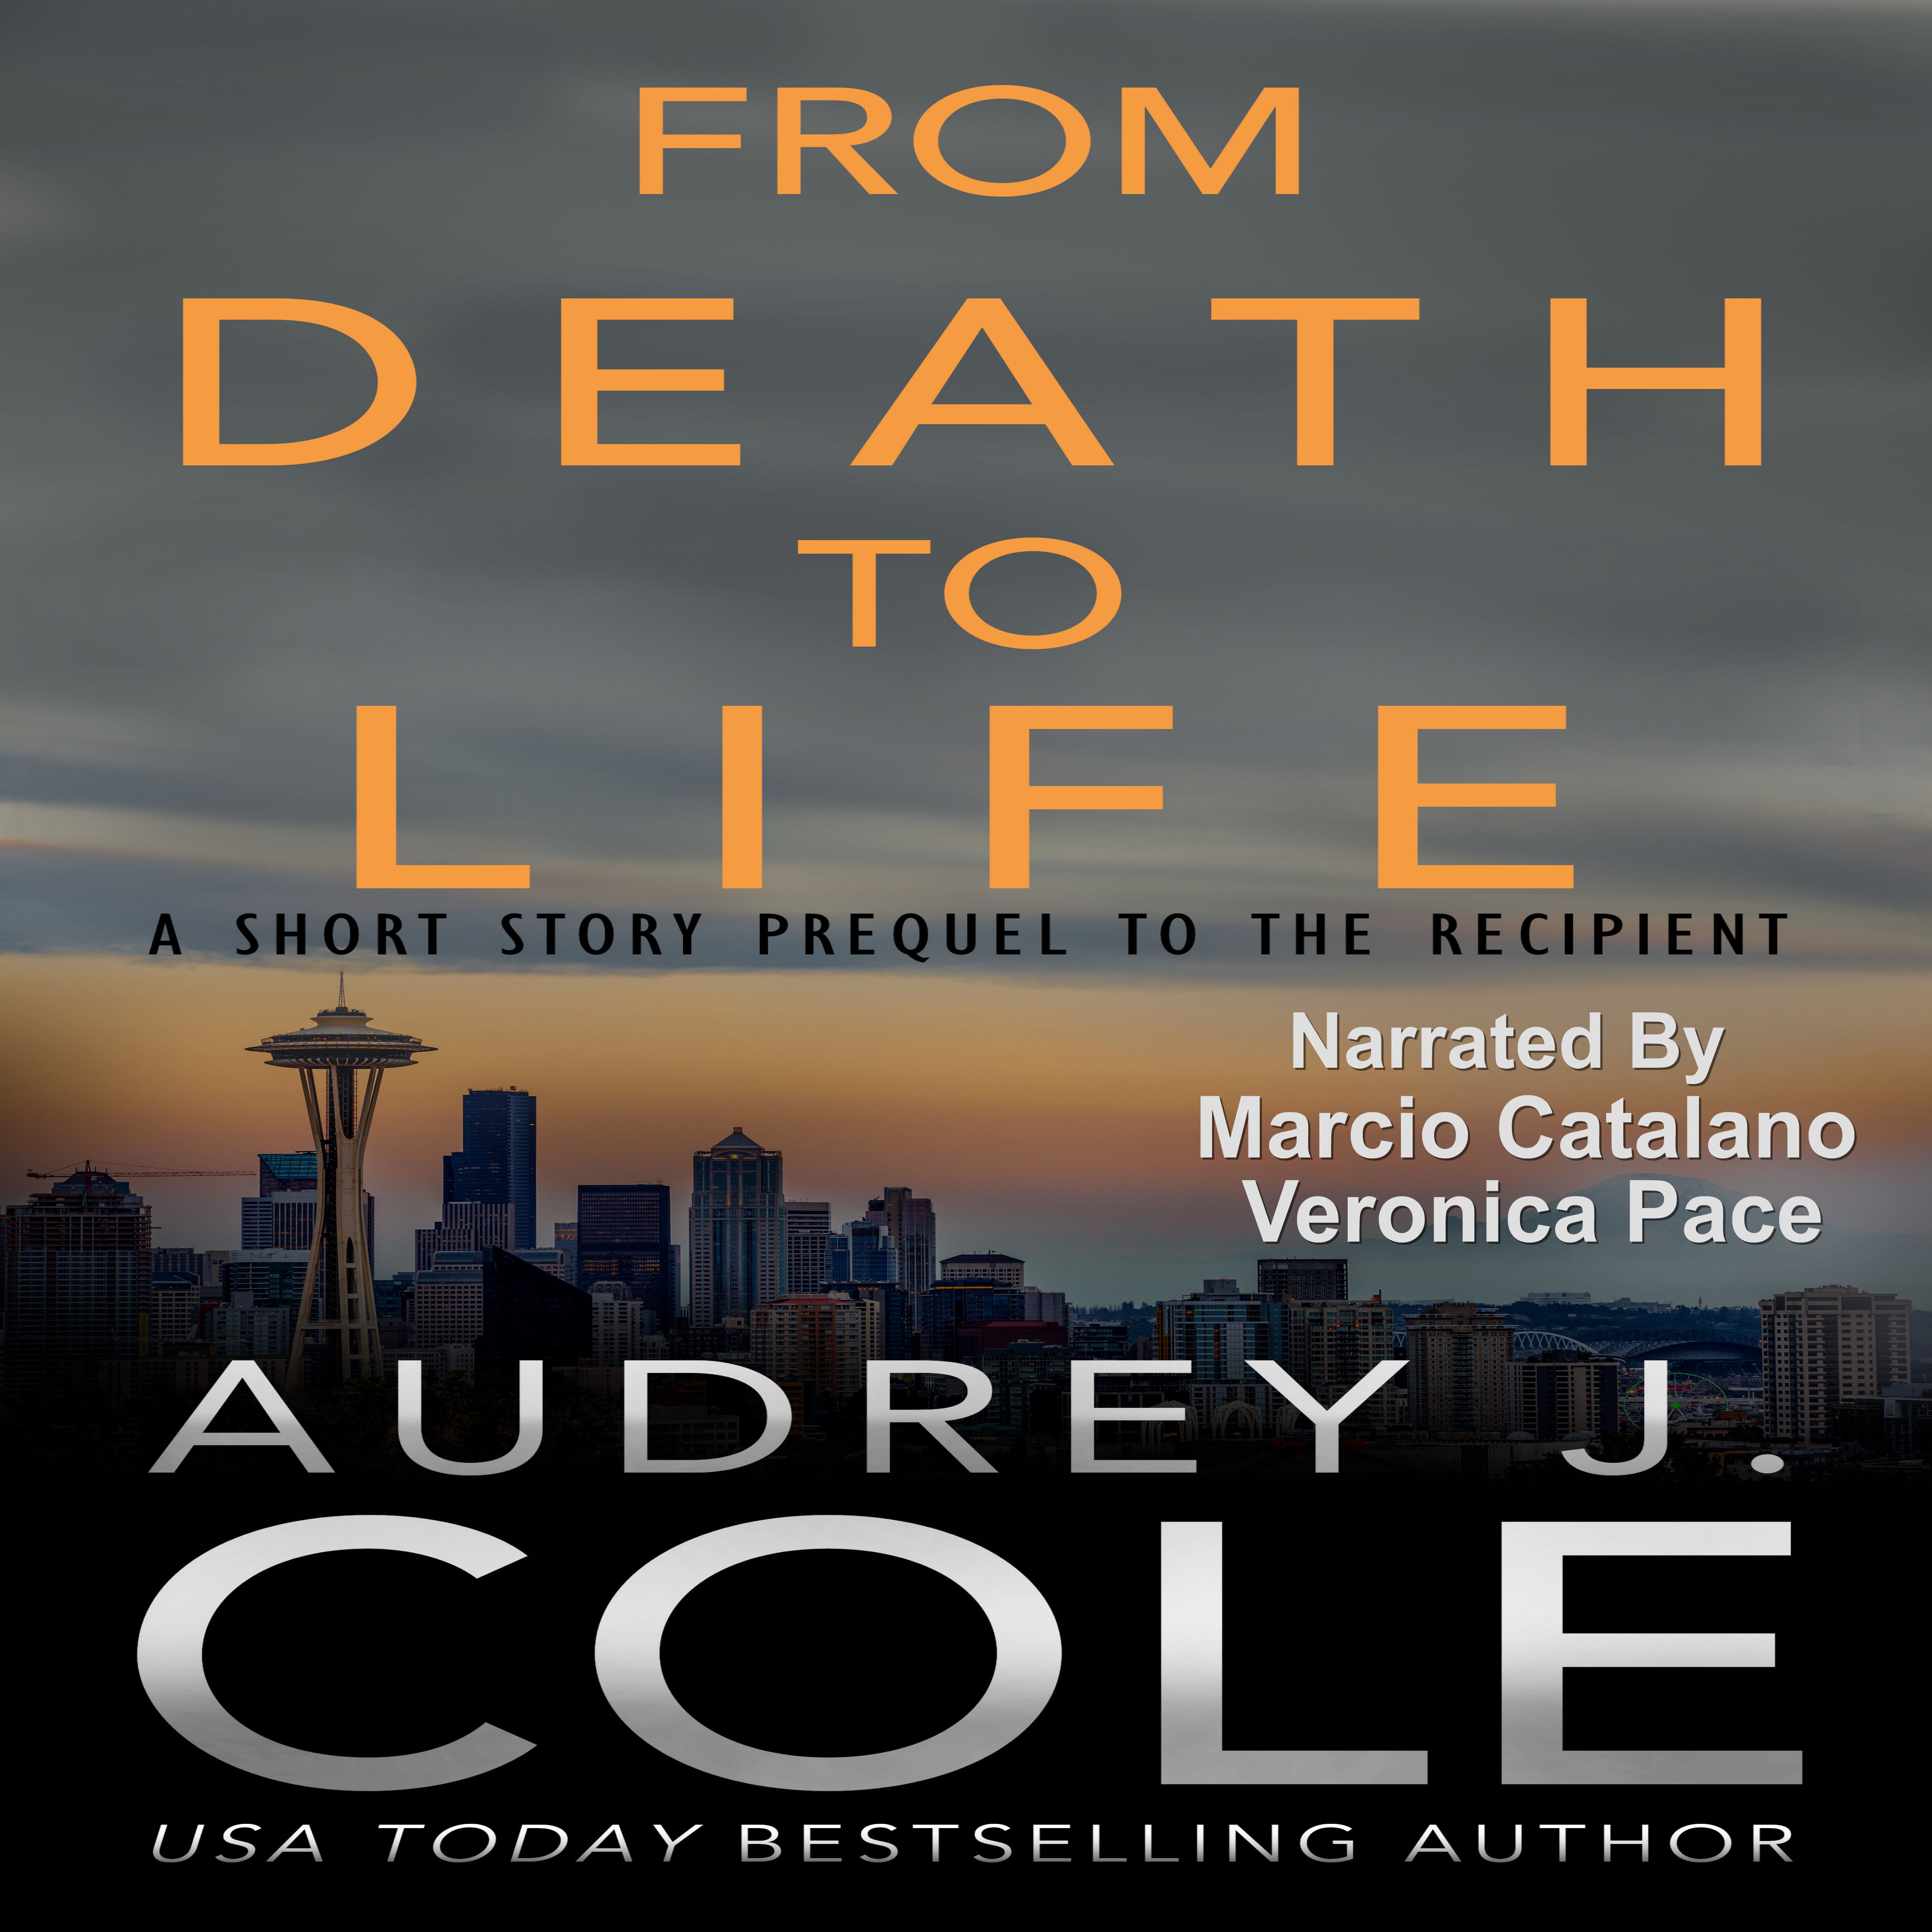 Title Cover-From Death to Life: The Recipient Prequel